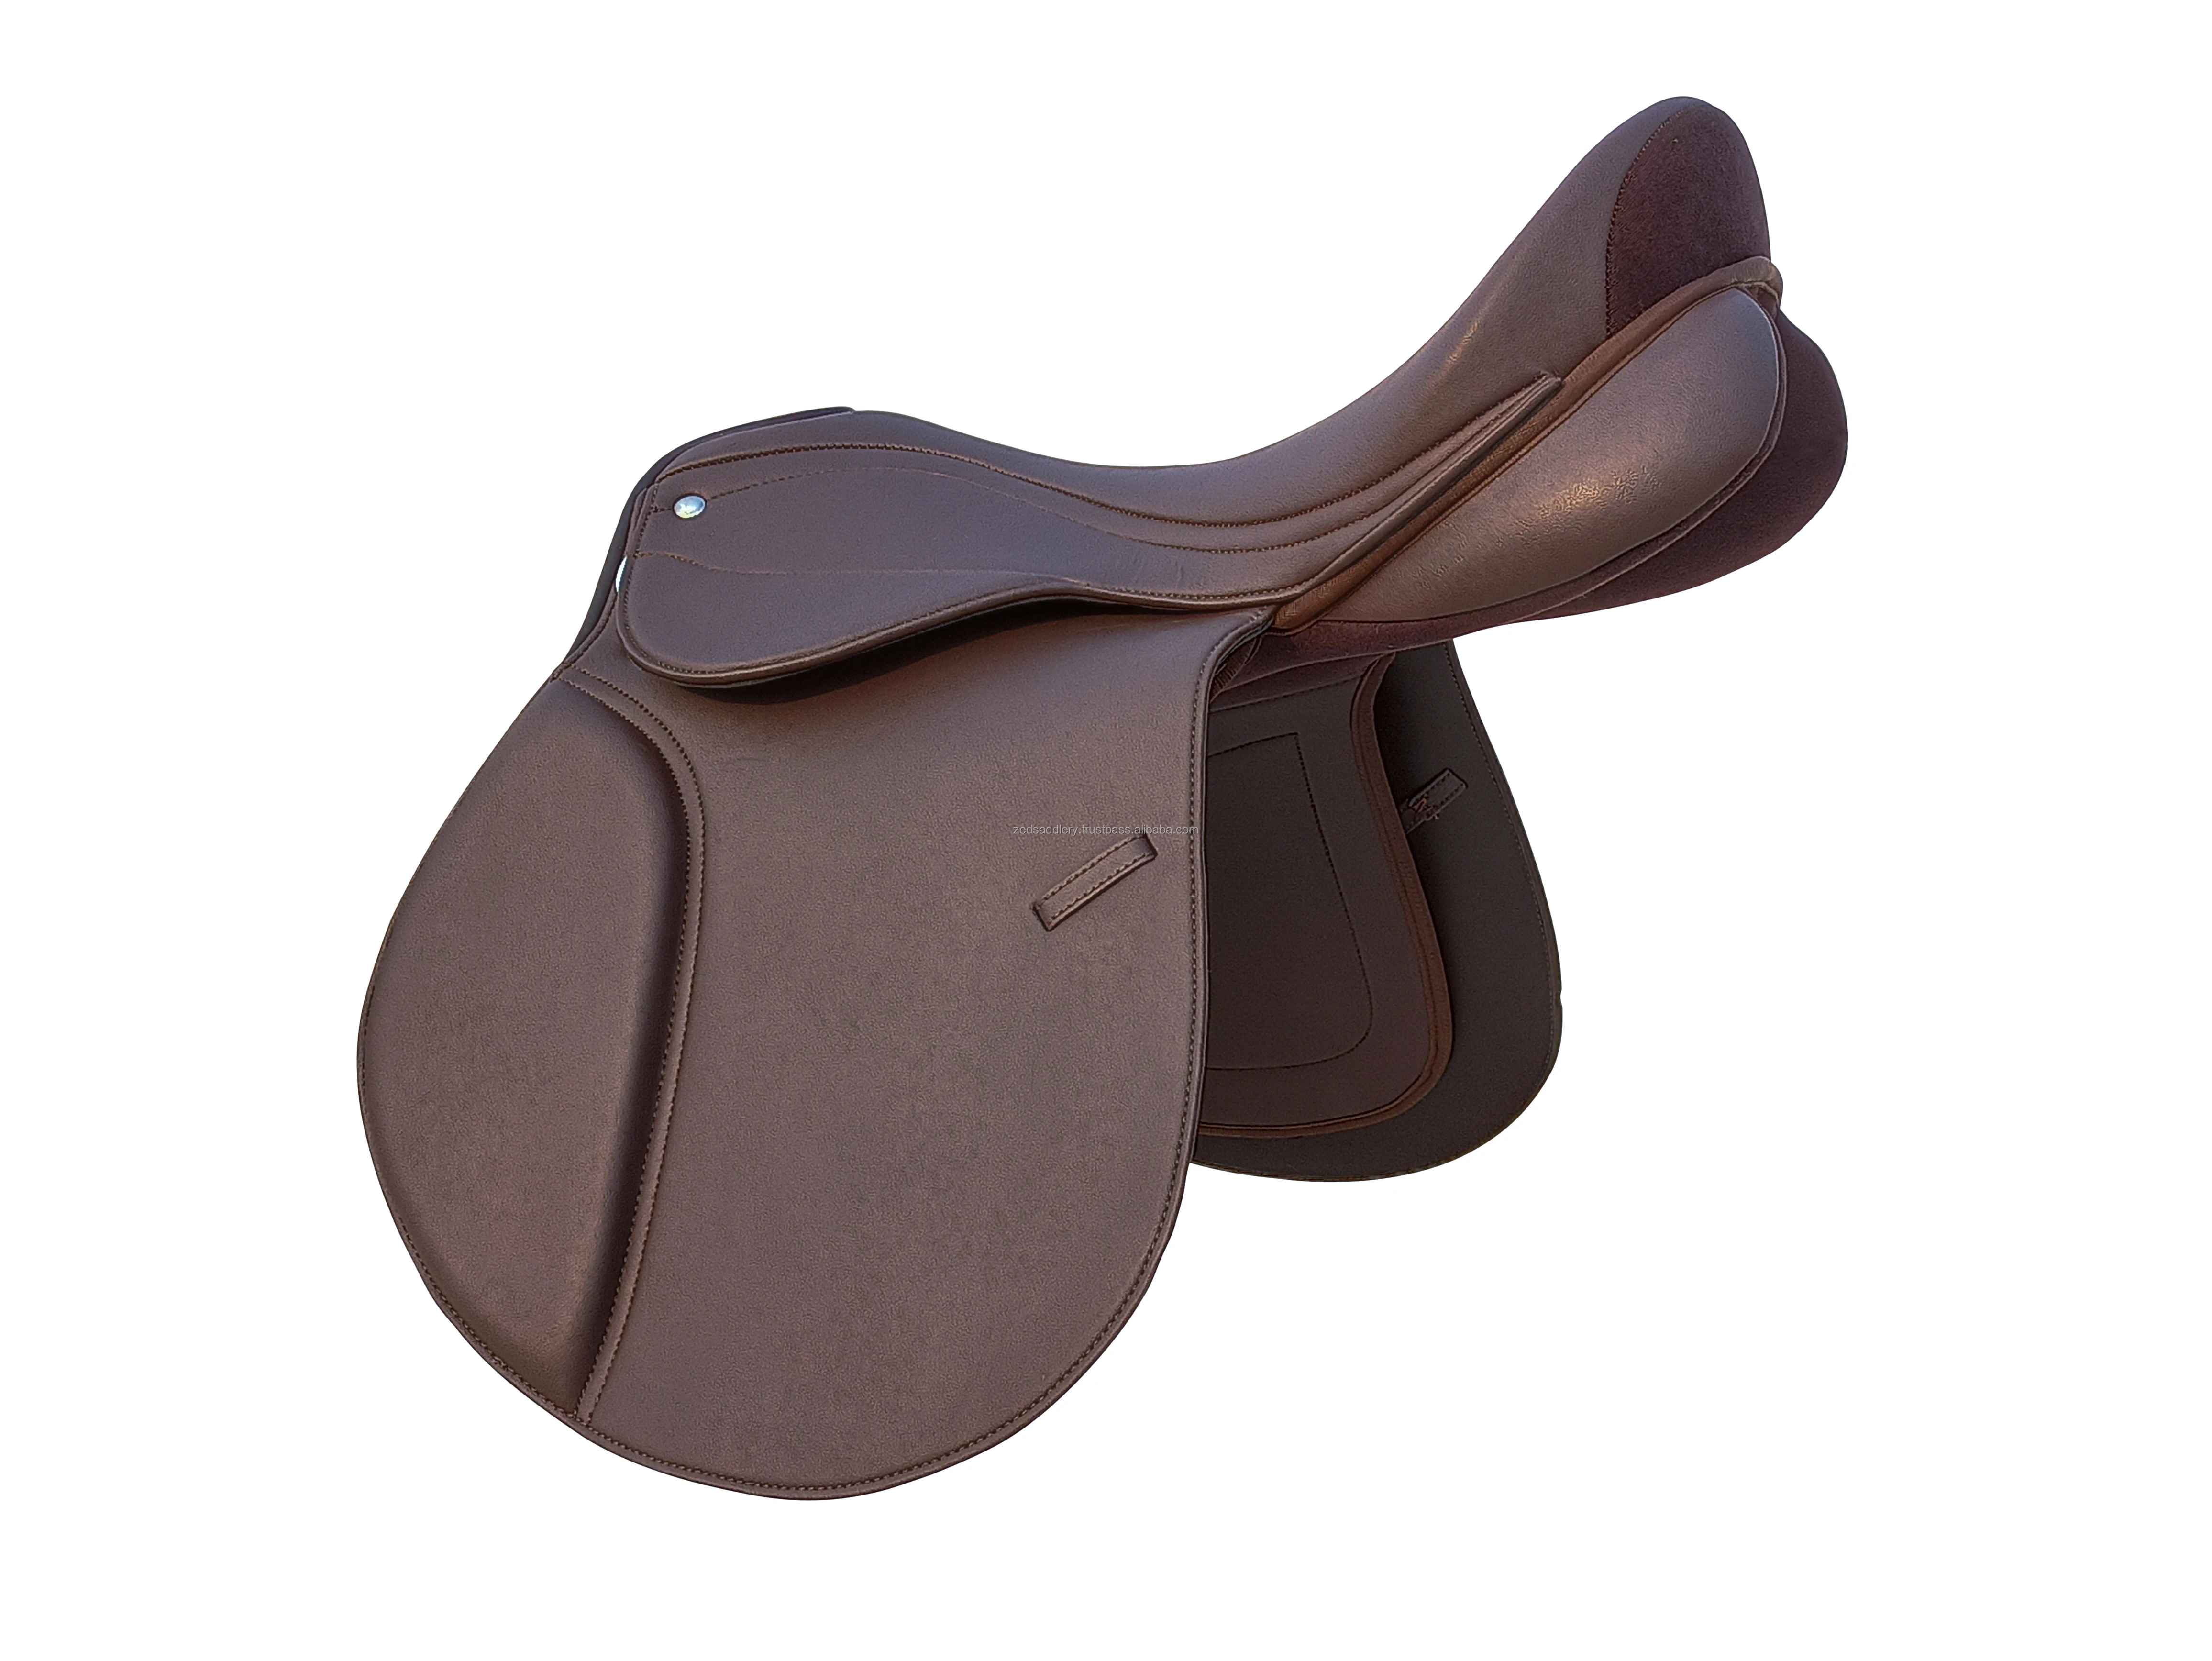 New general purpose synthetic leather horse saddle extra comfort 16'',17'',18'' 